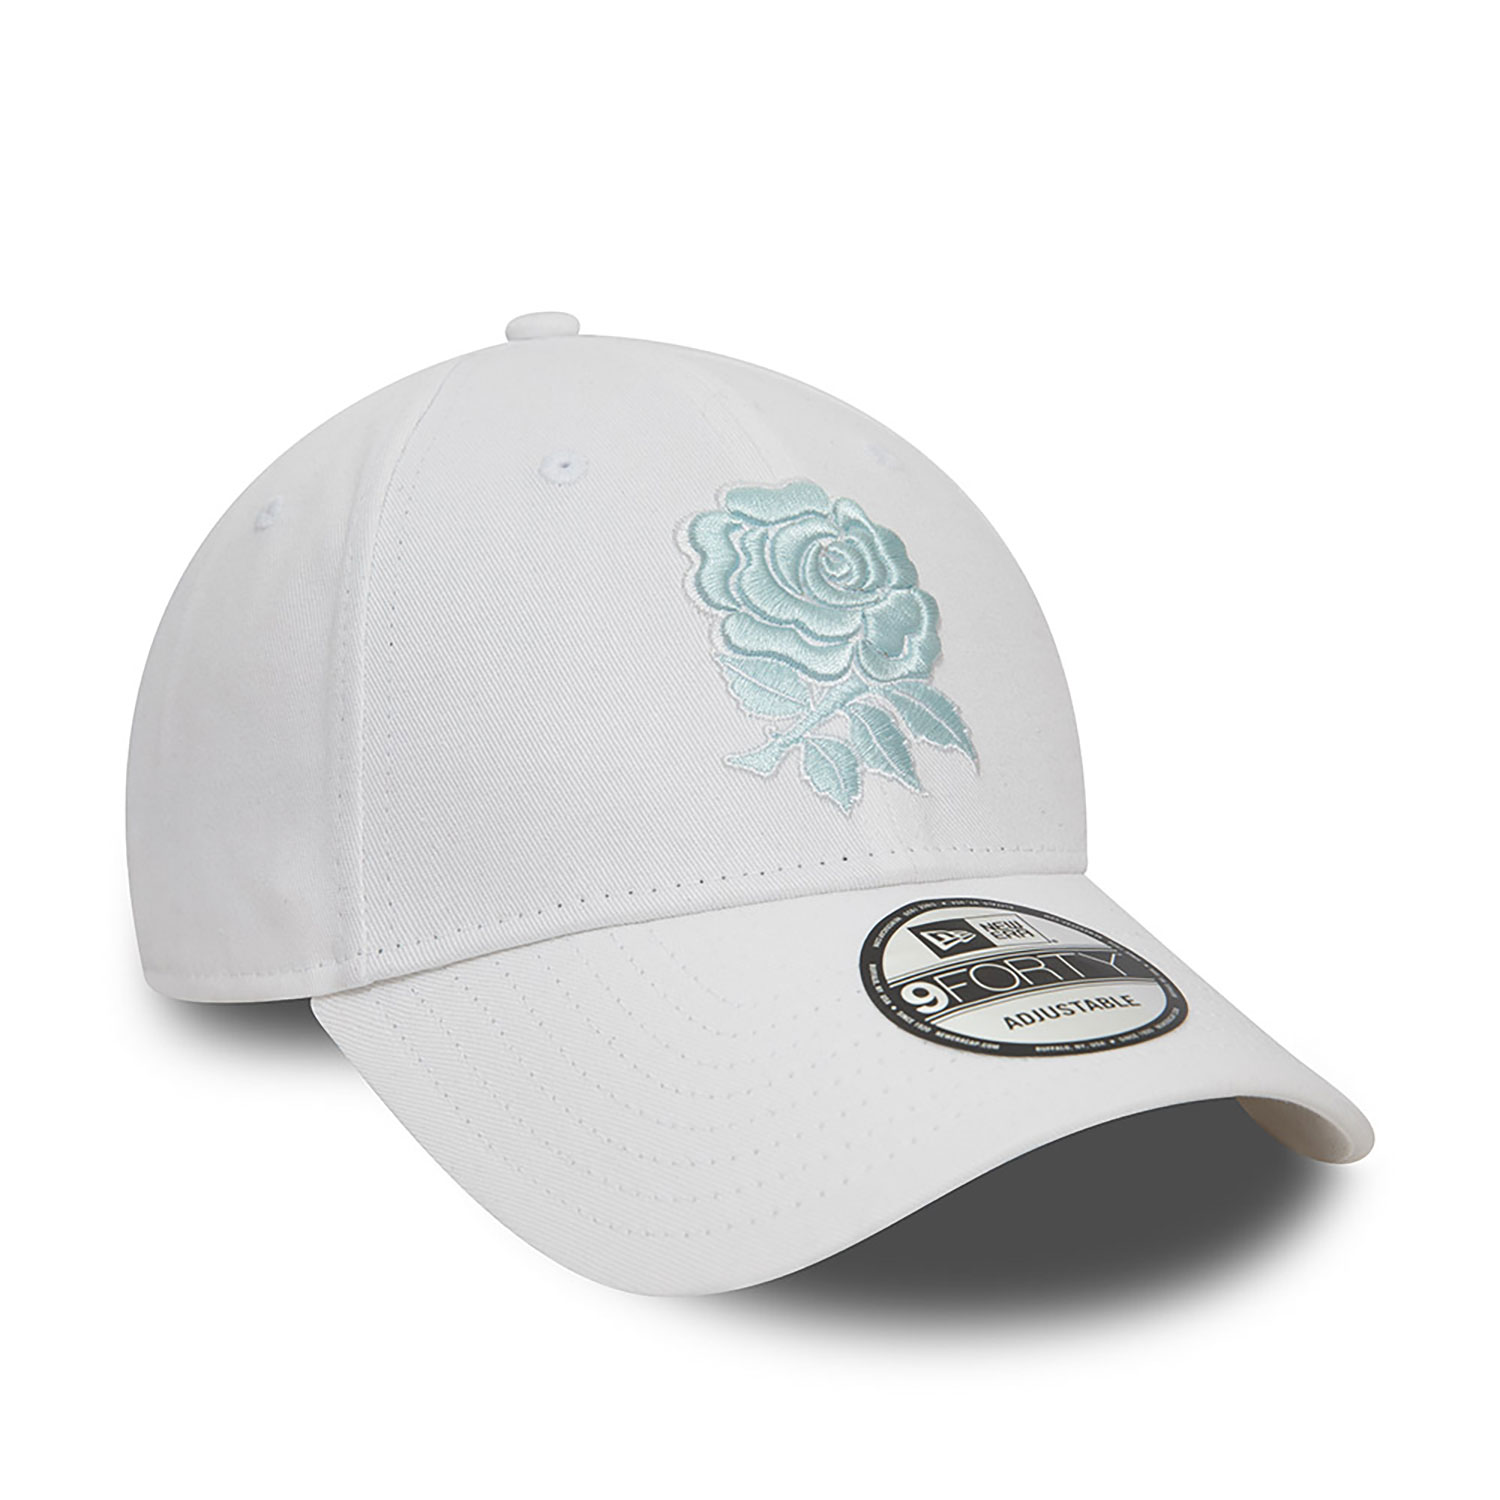 Rugby Football Union Kit Hookup White 9FORTY Adjustable Cap